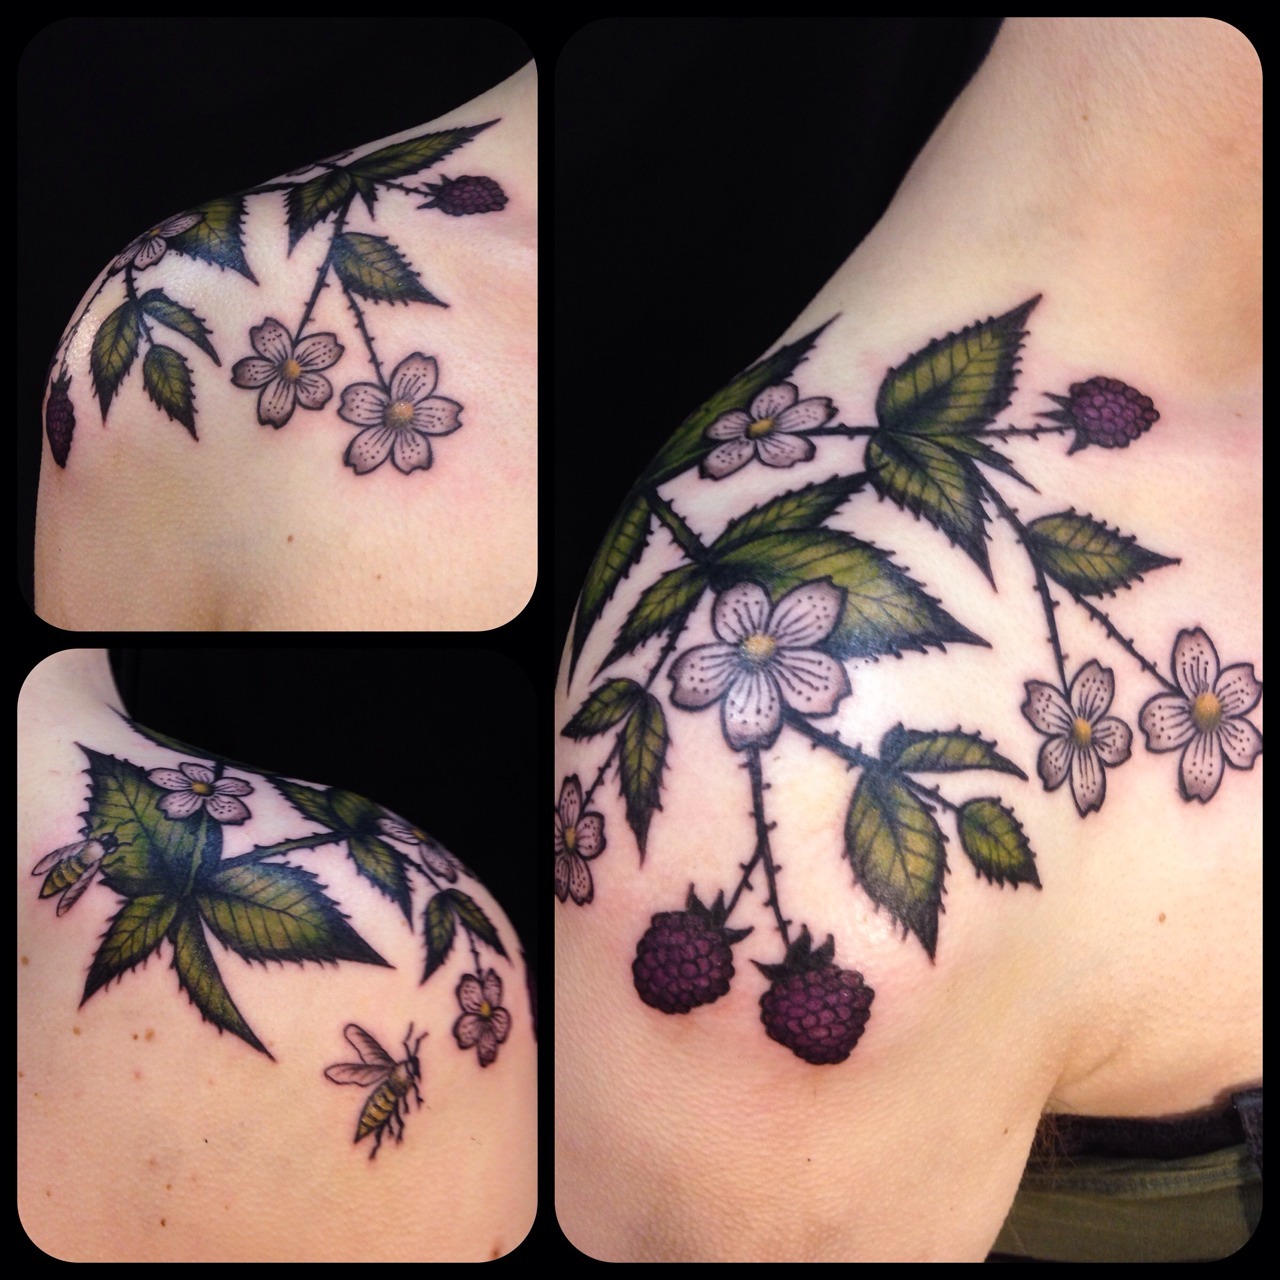 Another little blackberry sprig for Mary   Savannah Trevino